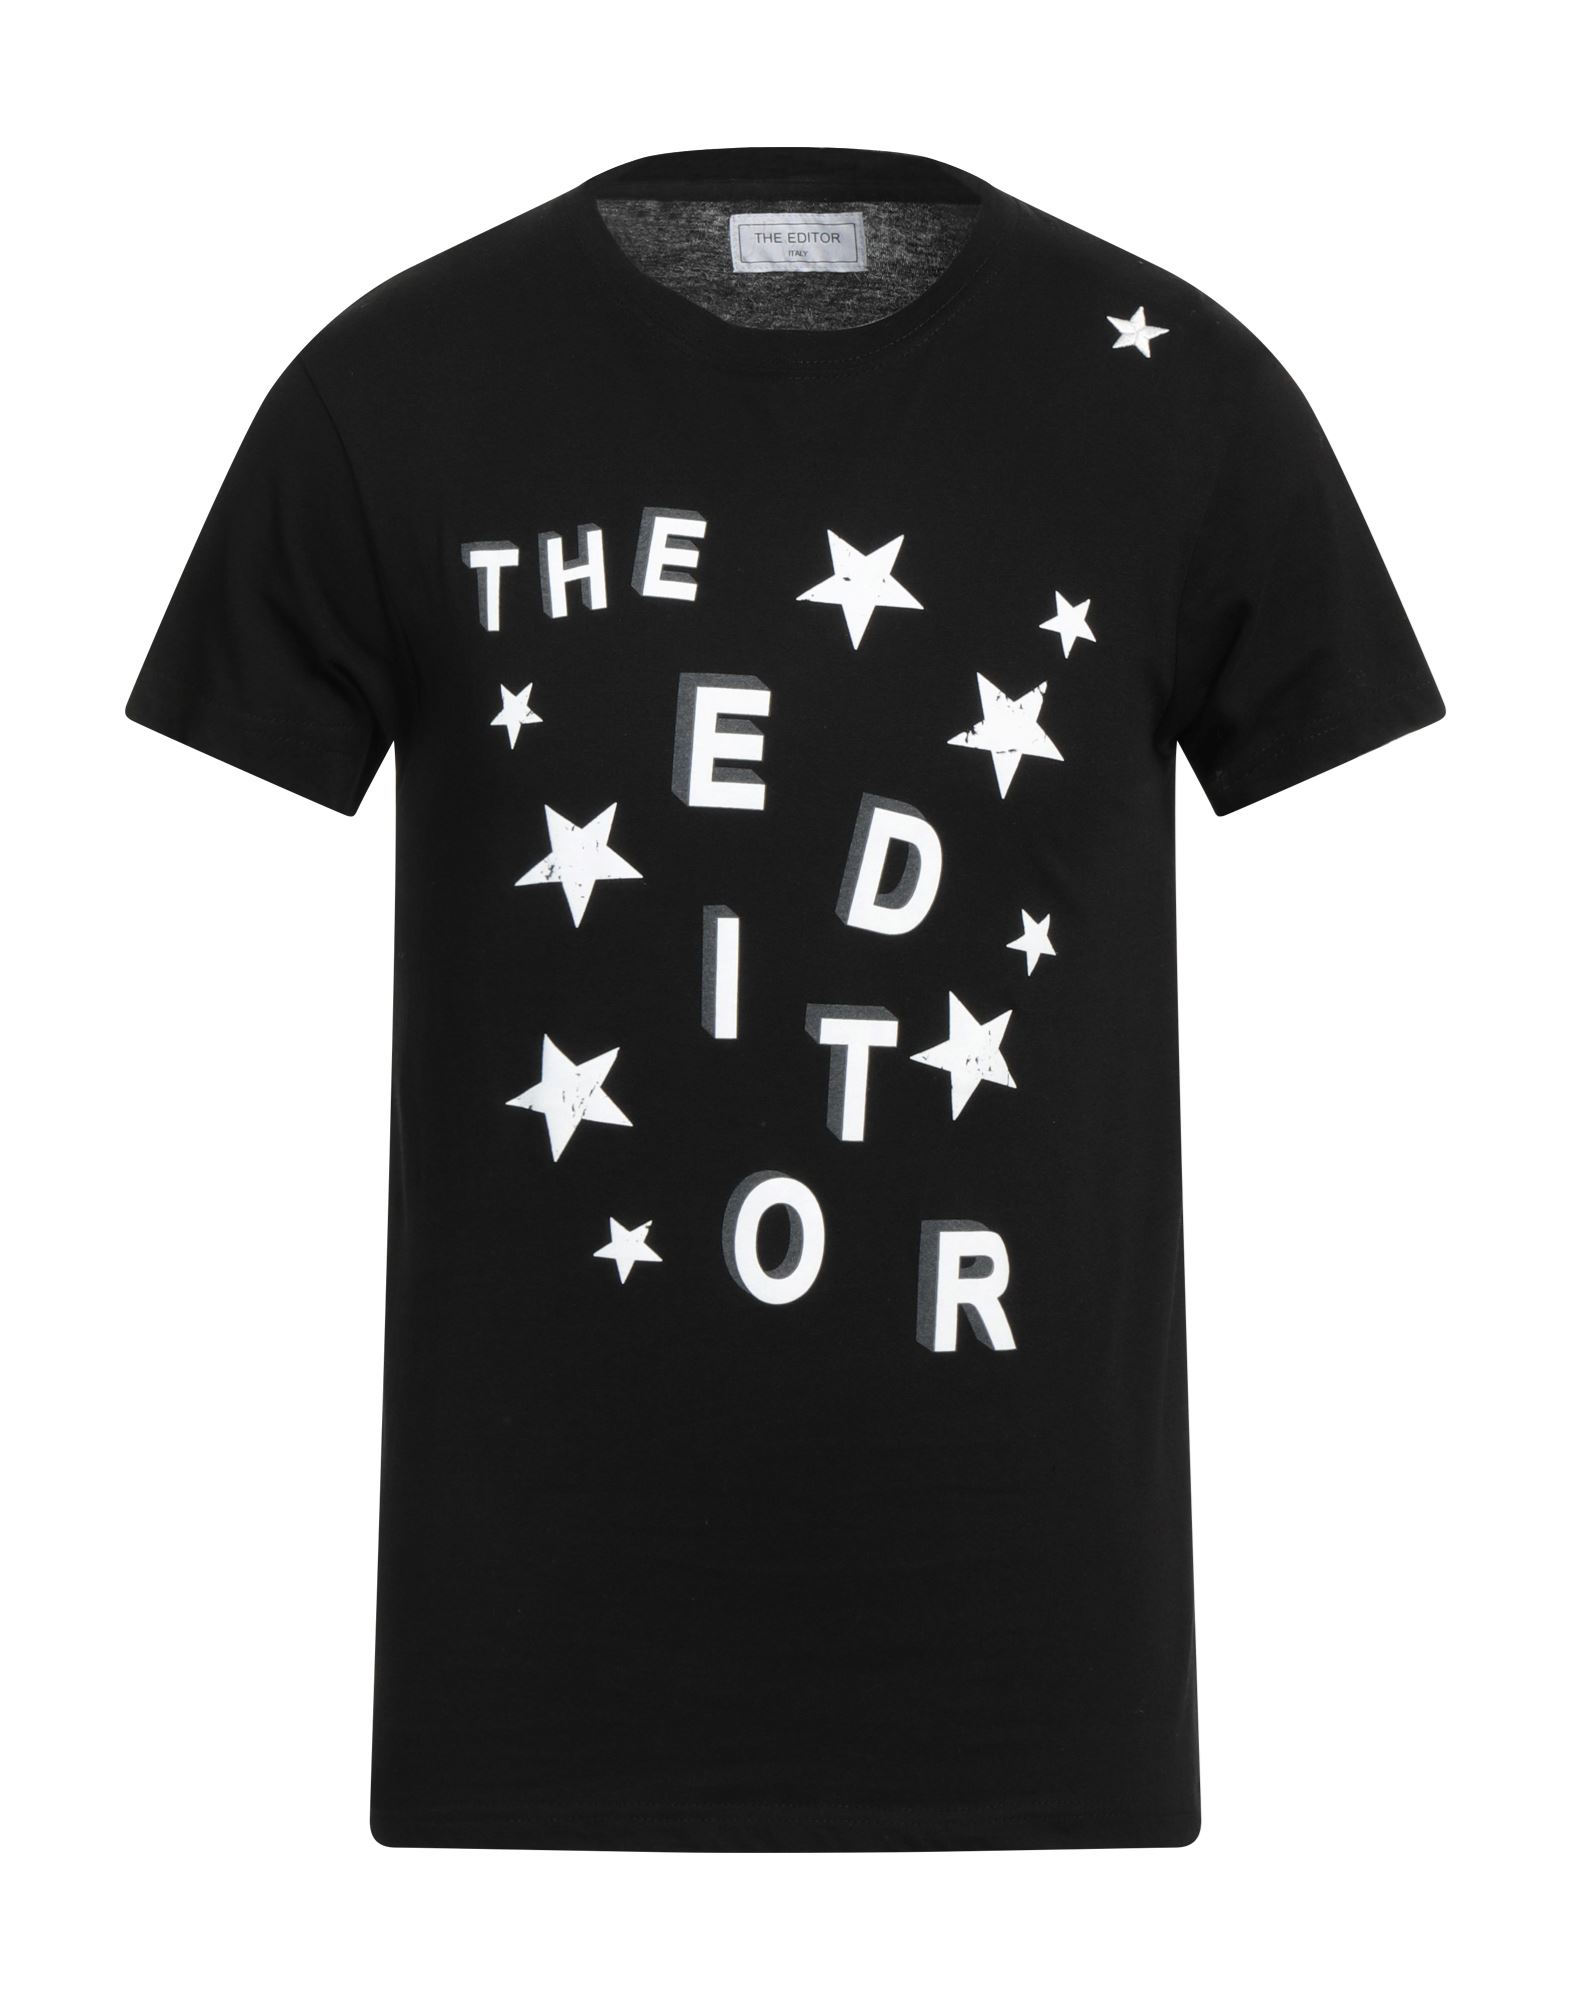 THE EDITOR THE EDITOR MAN T-SHIRT BLACK SIZE S COTTON